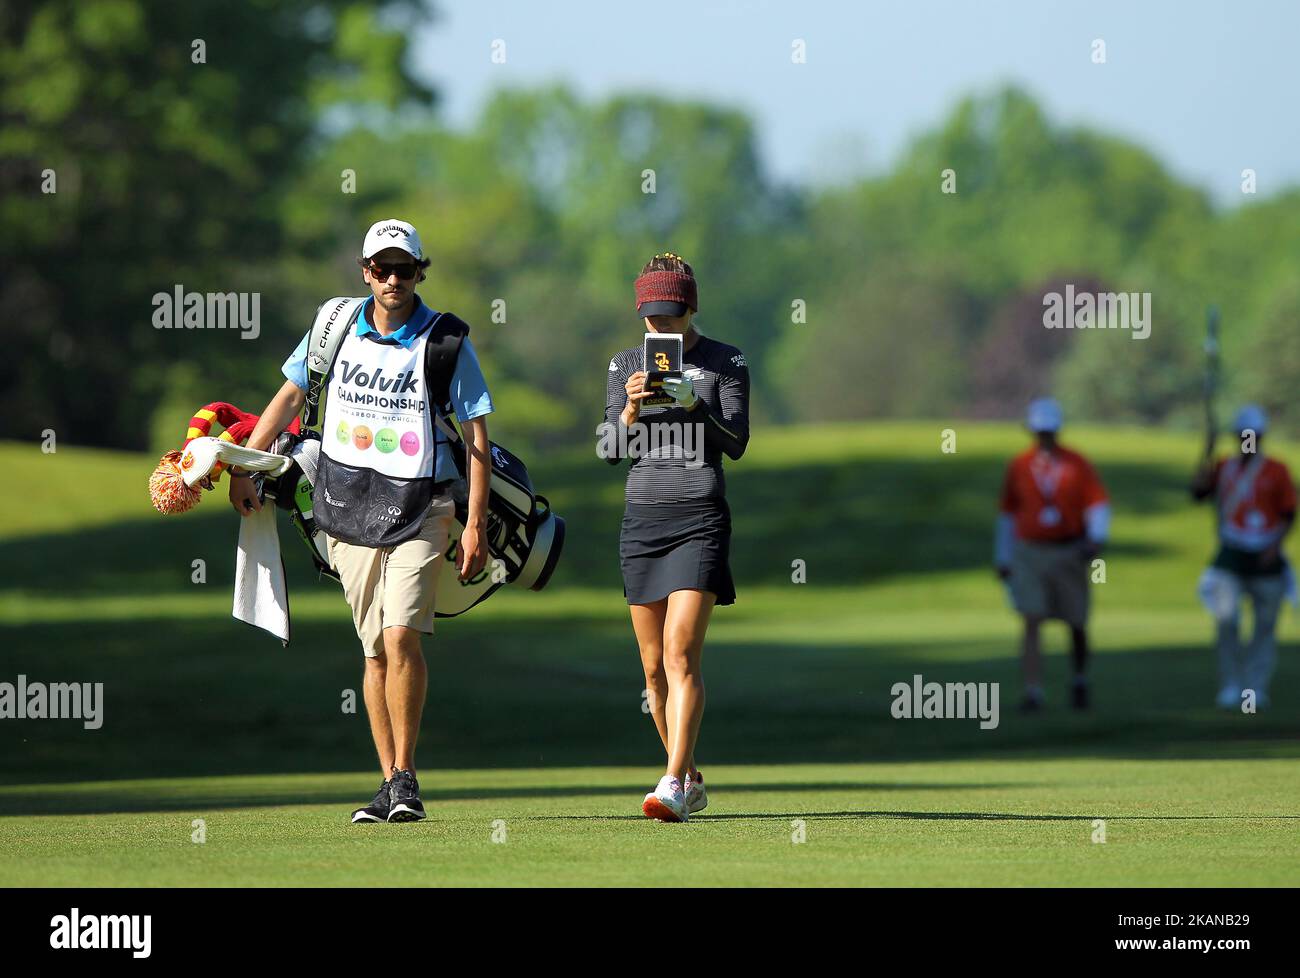 Belen Mozo of Spain and caddie walk on the fairway of the 6th hole during the third round of the LPGA Volvik Championship at Travis Pointe Country Club, Ann Arbor, MI, USA Saturday, May 27, 2017. (Photo by Jorge Lemus/NurPhoto) *** Please Use Credit from Credit Field *** Stock Photo